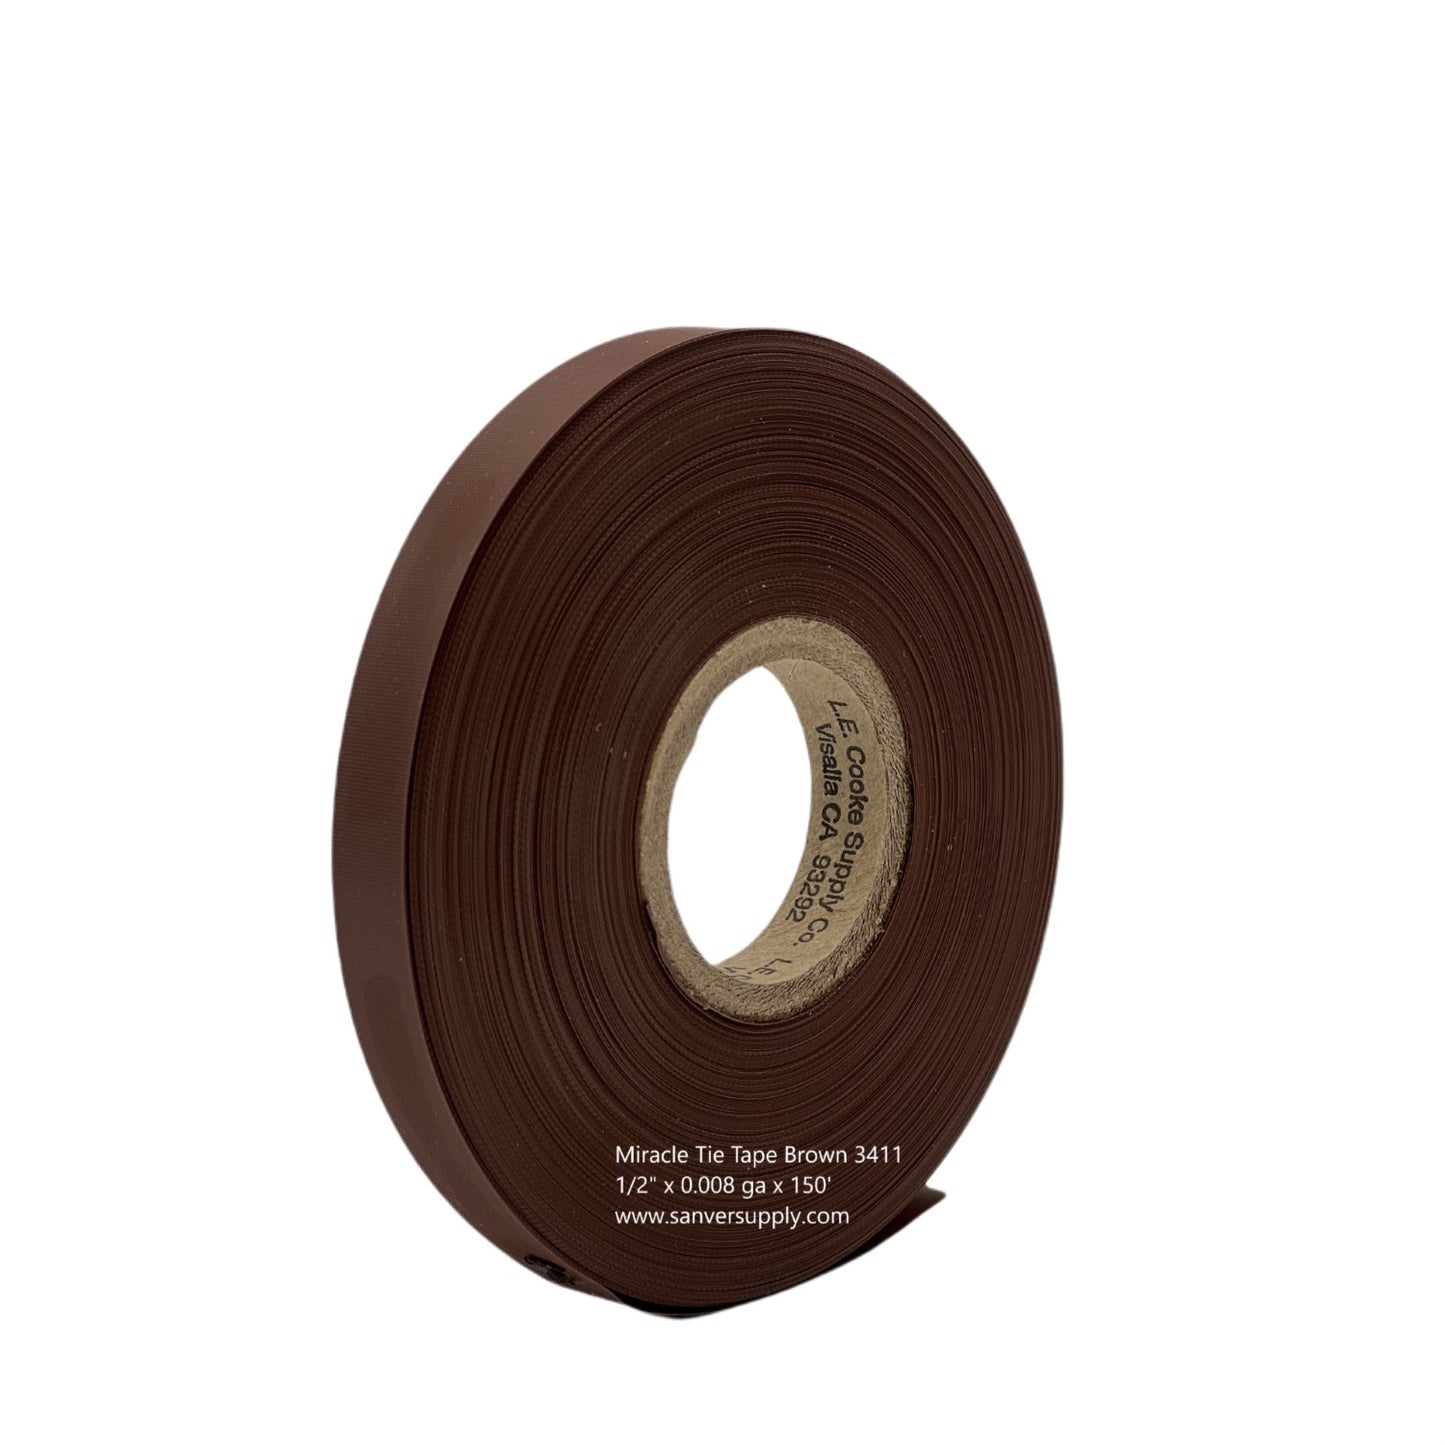 MGT Vineyard Tie Tape BROWN Large Roll for Tapener HT-R2 (3411)